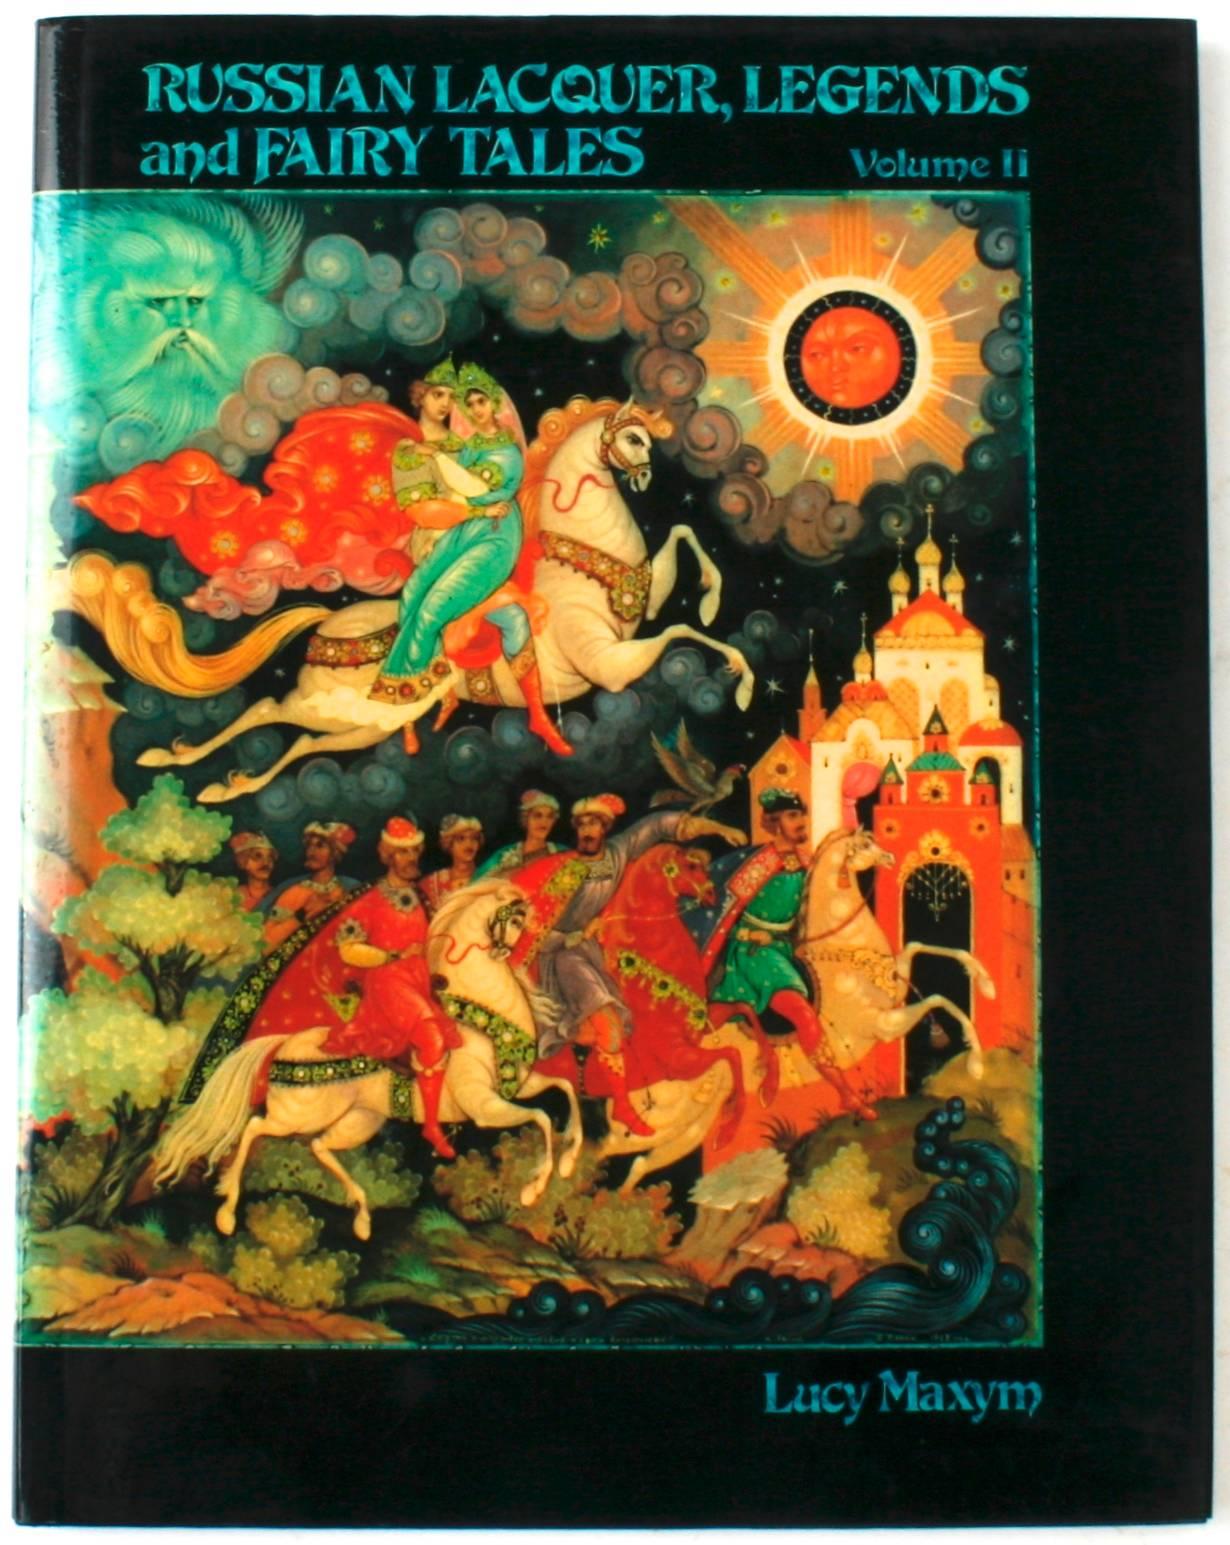 Paper Russian Lacquer, Legends and Fairy Tales Volumes I and II